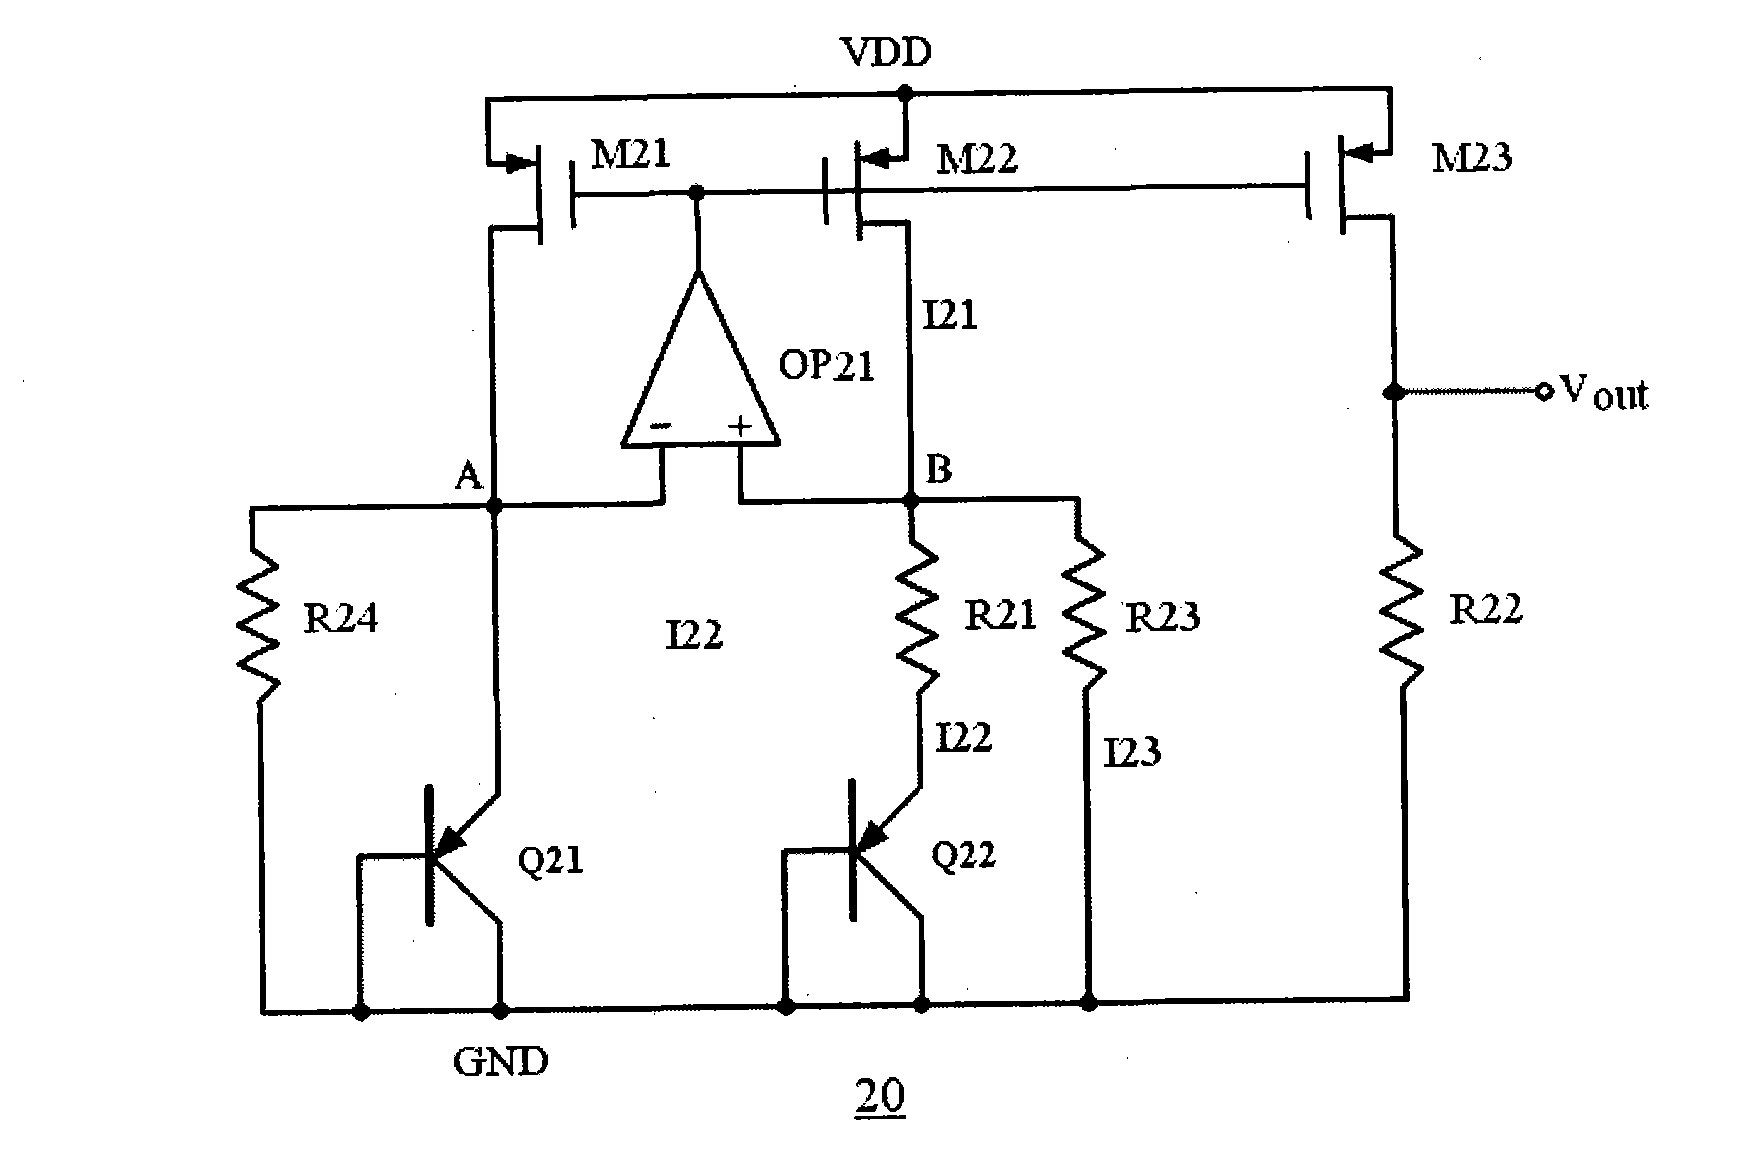 Bandgap voltage reference circuit with start-up circuit